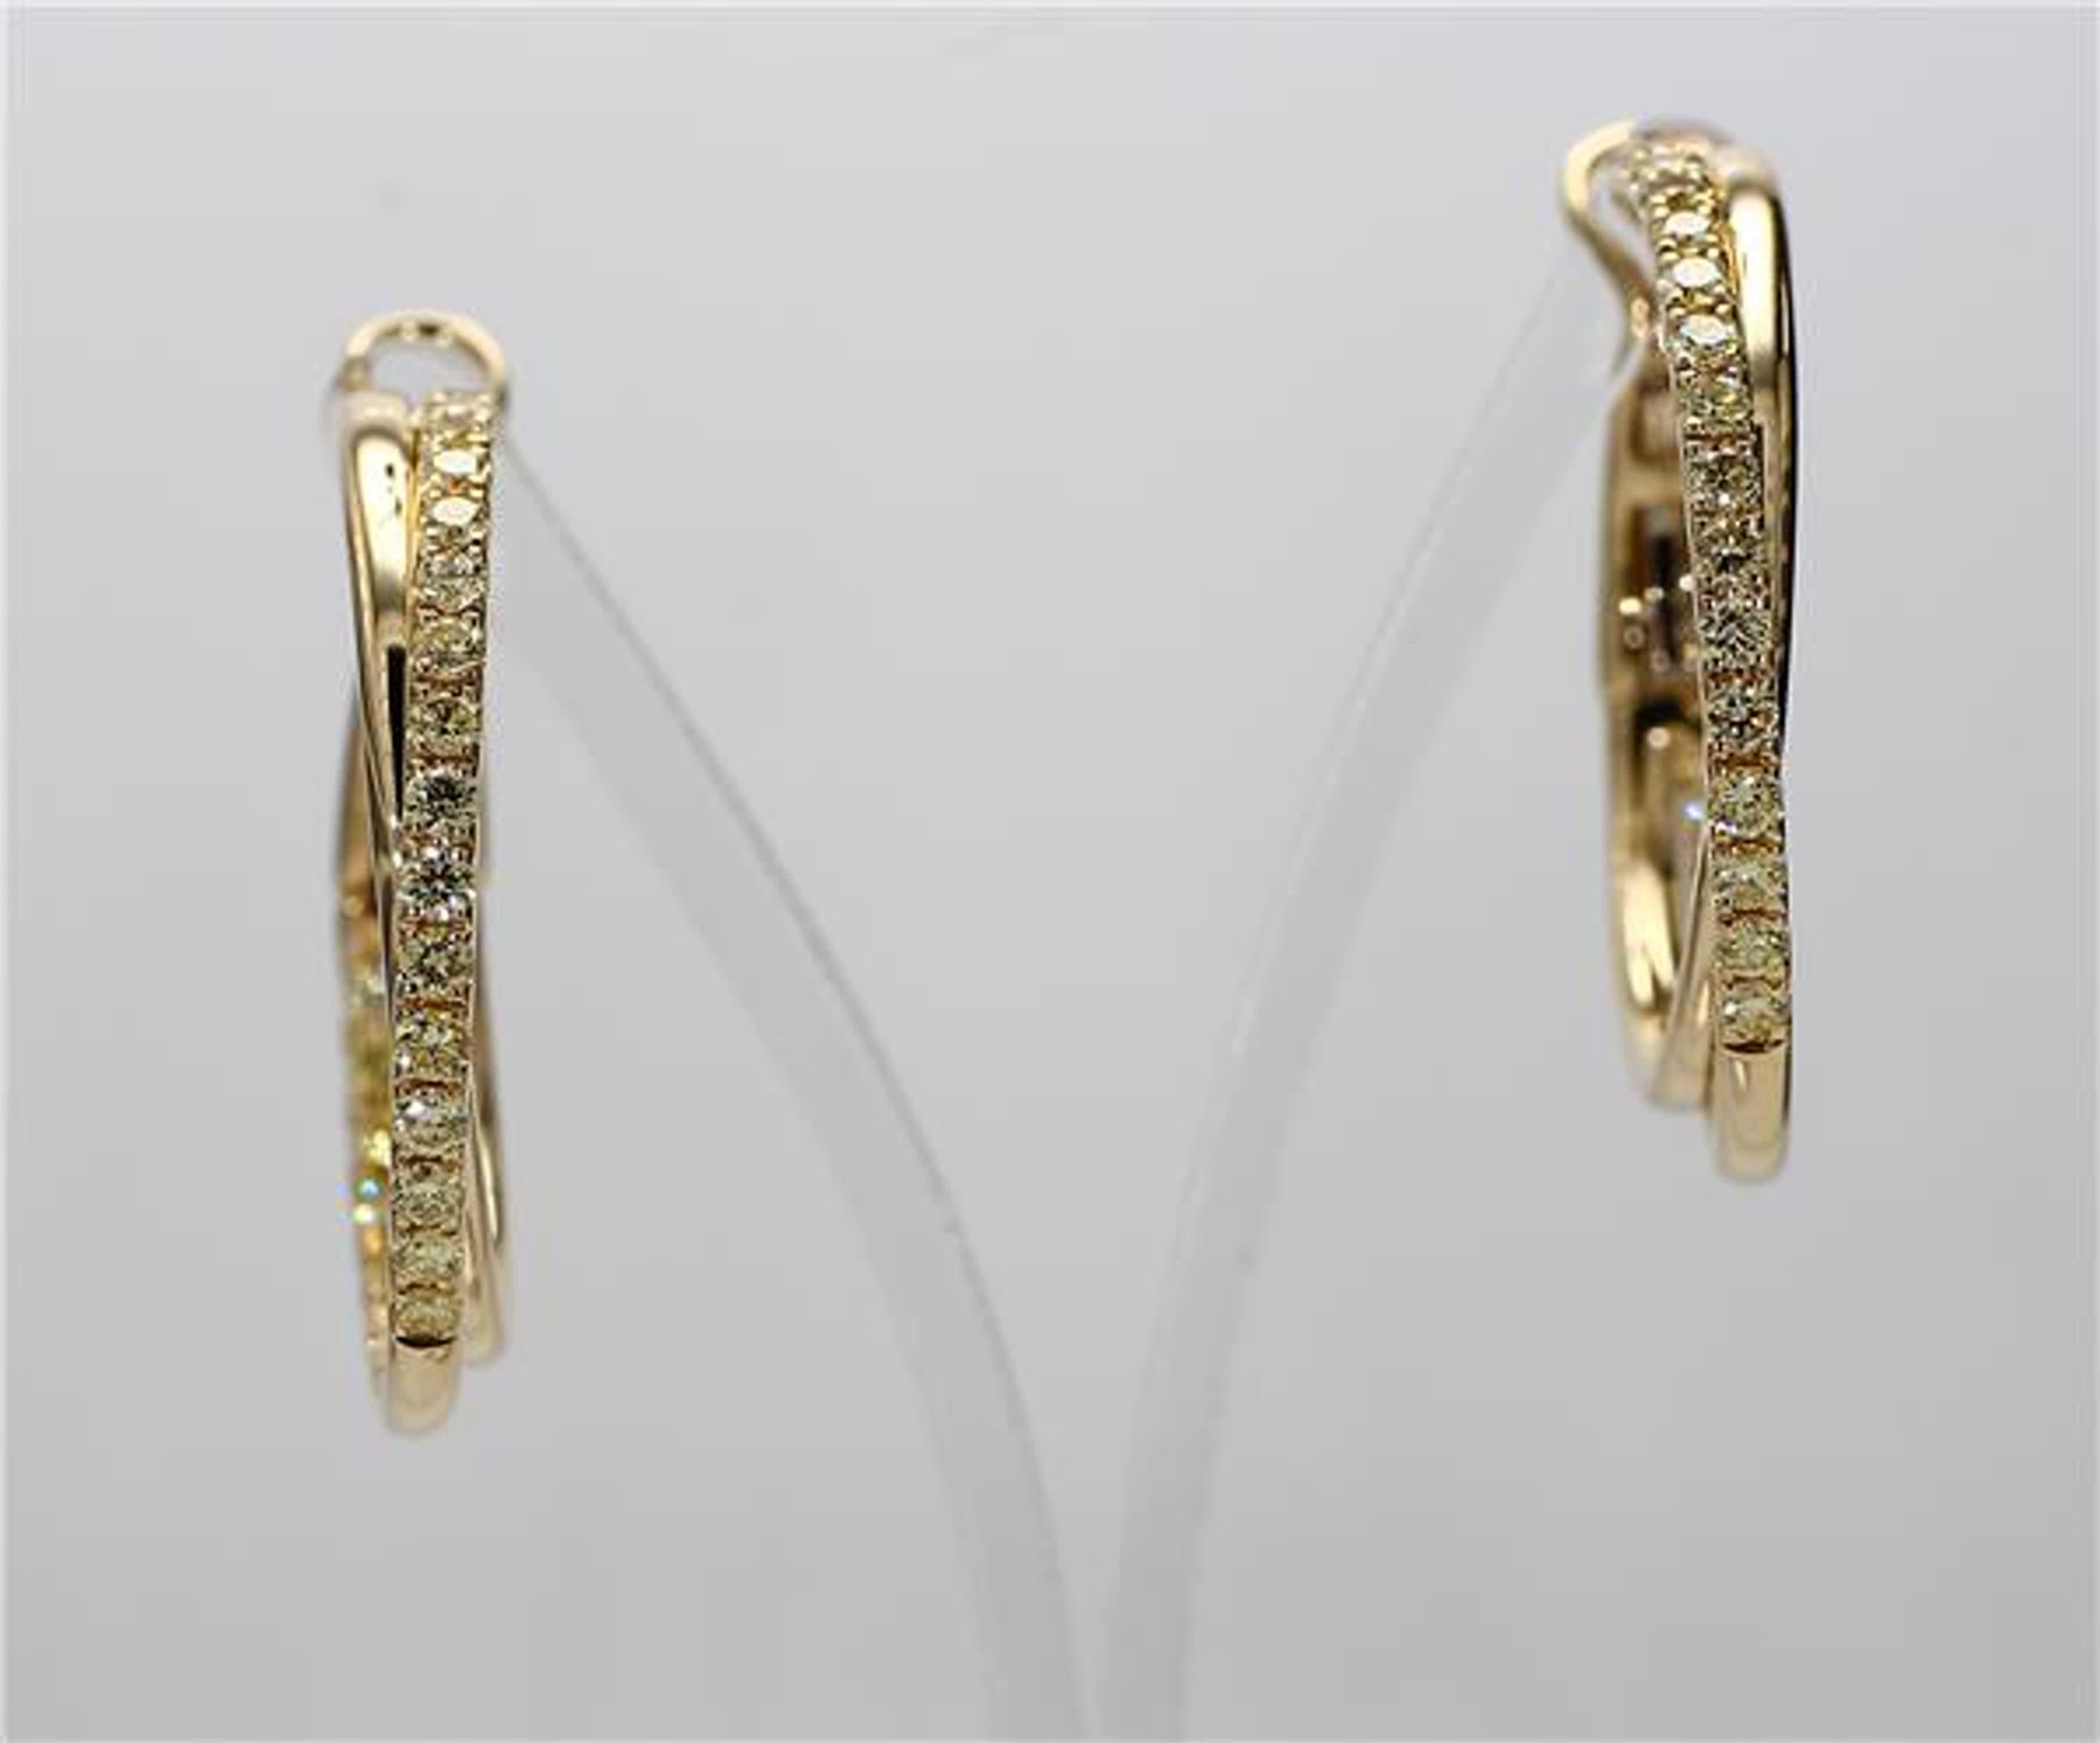 RareGemWorld's classic diamond earrings. Mounted in a beautiful 18K Yellow Gold setting with natural round cut yellow diamonds. These earrings are guaranteed to impress and enhance your personal collection!

Total Weight: 1.44cts

Length x Width: